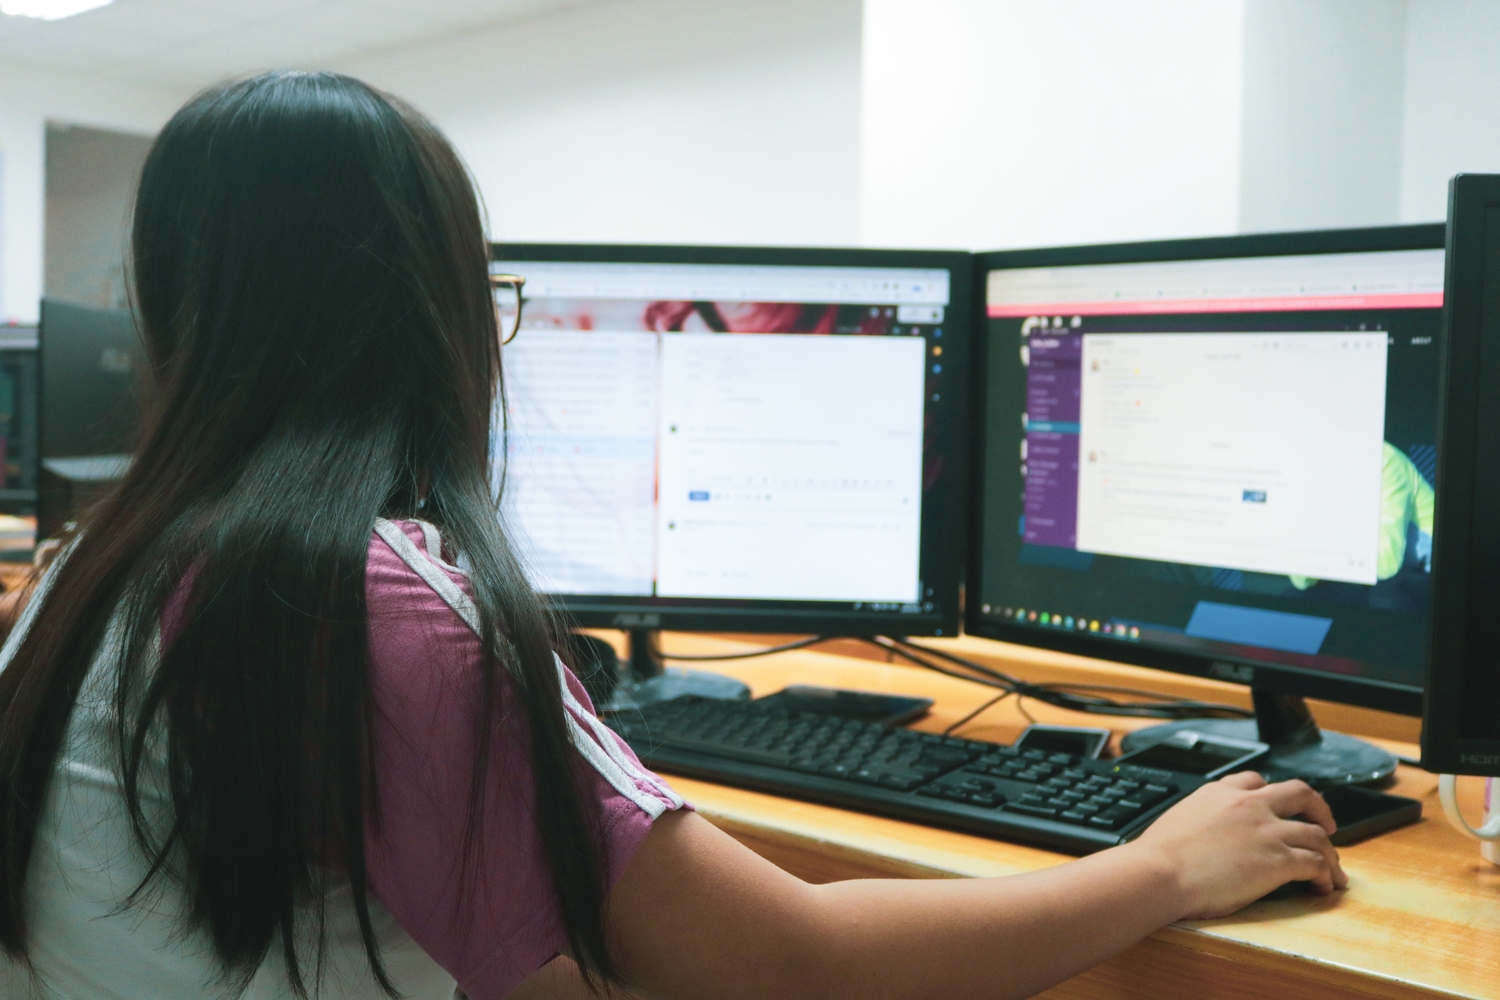 A black-haired woman with glasses using a computer with two monitors—an excellent use-case for Windows keyboard shortcuts.